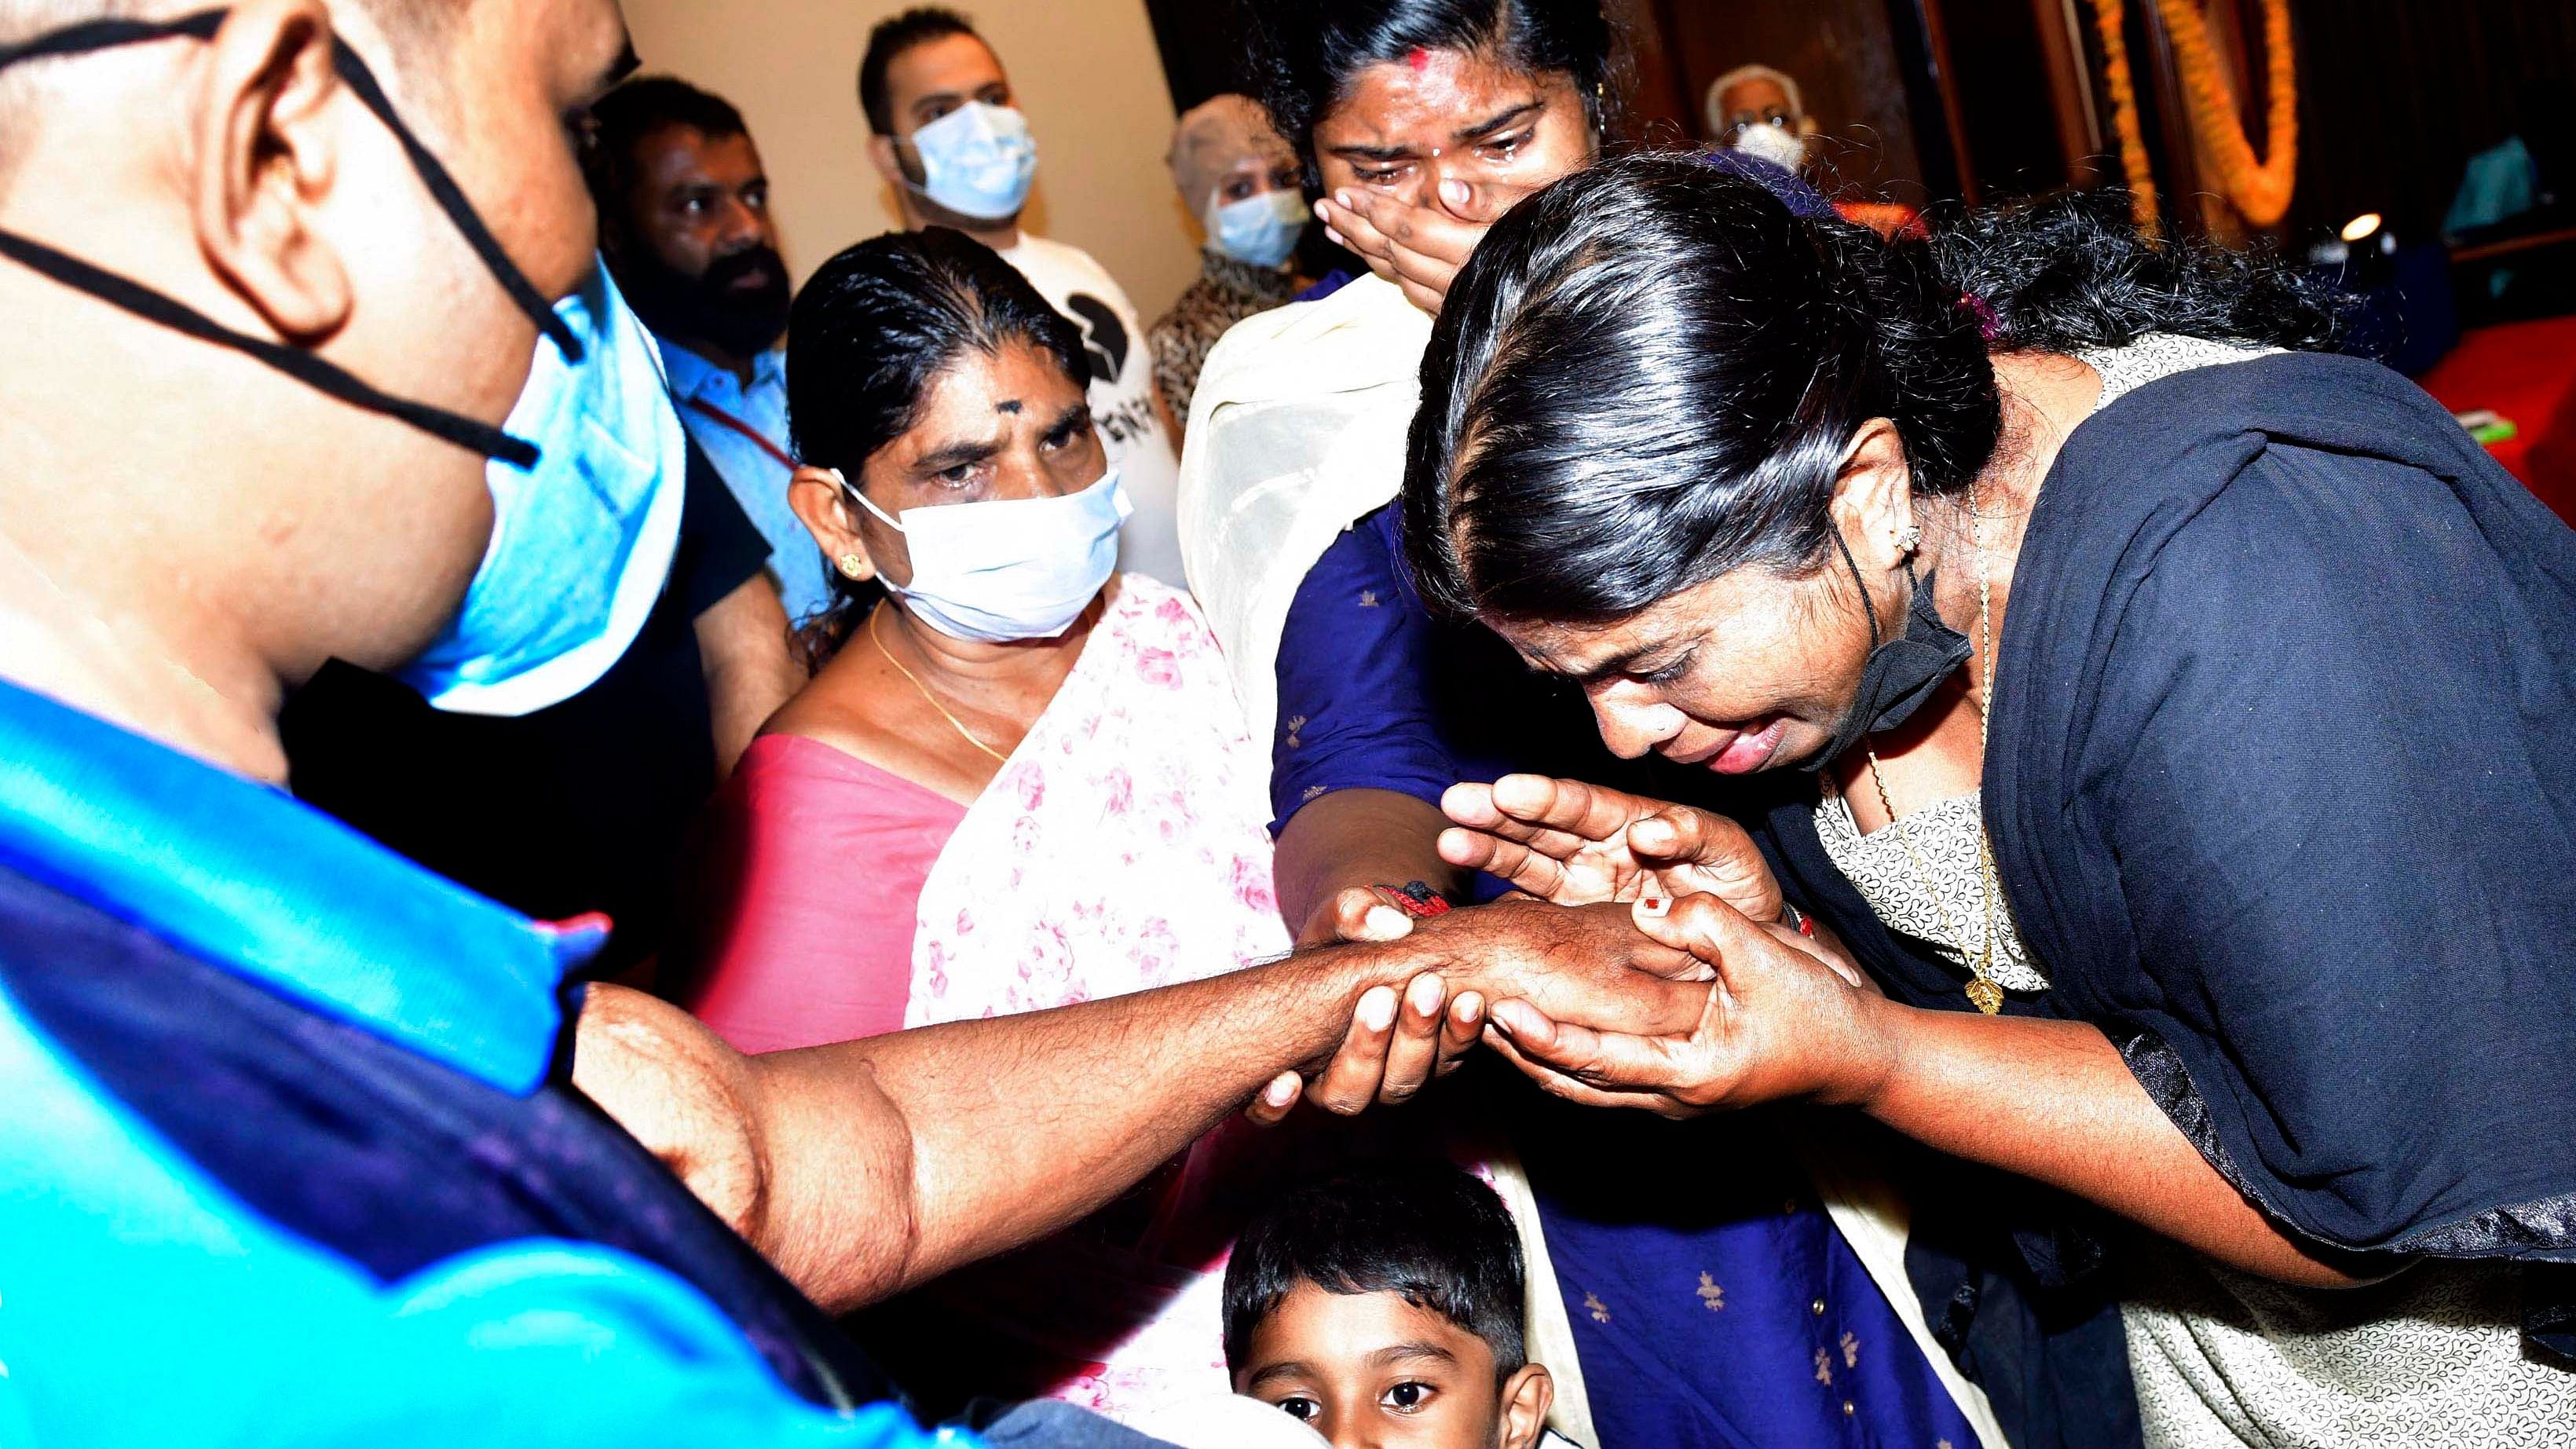 Emotional meeting of cadaveric donors' family and organ recipients in Kochi. Credit: Arjun Raghunath/DH Photo